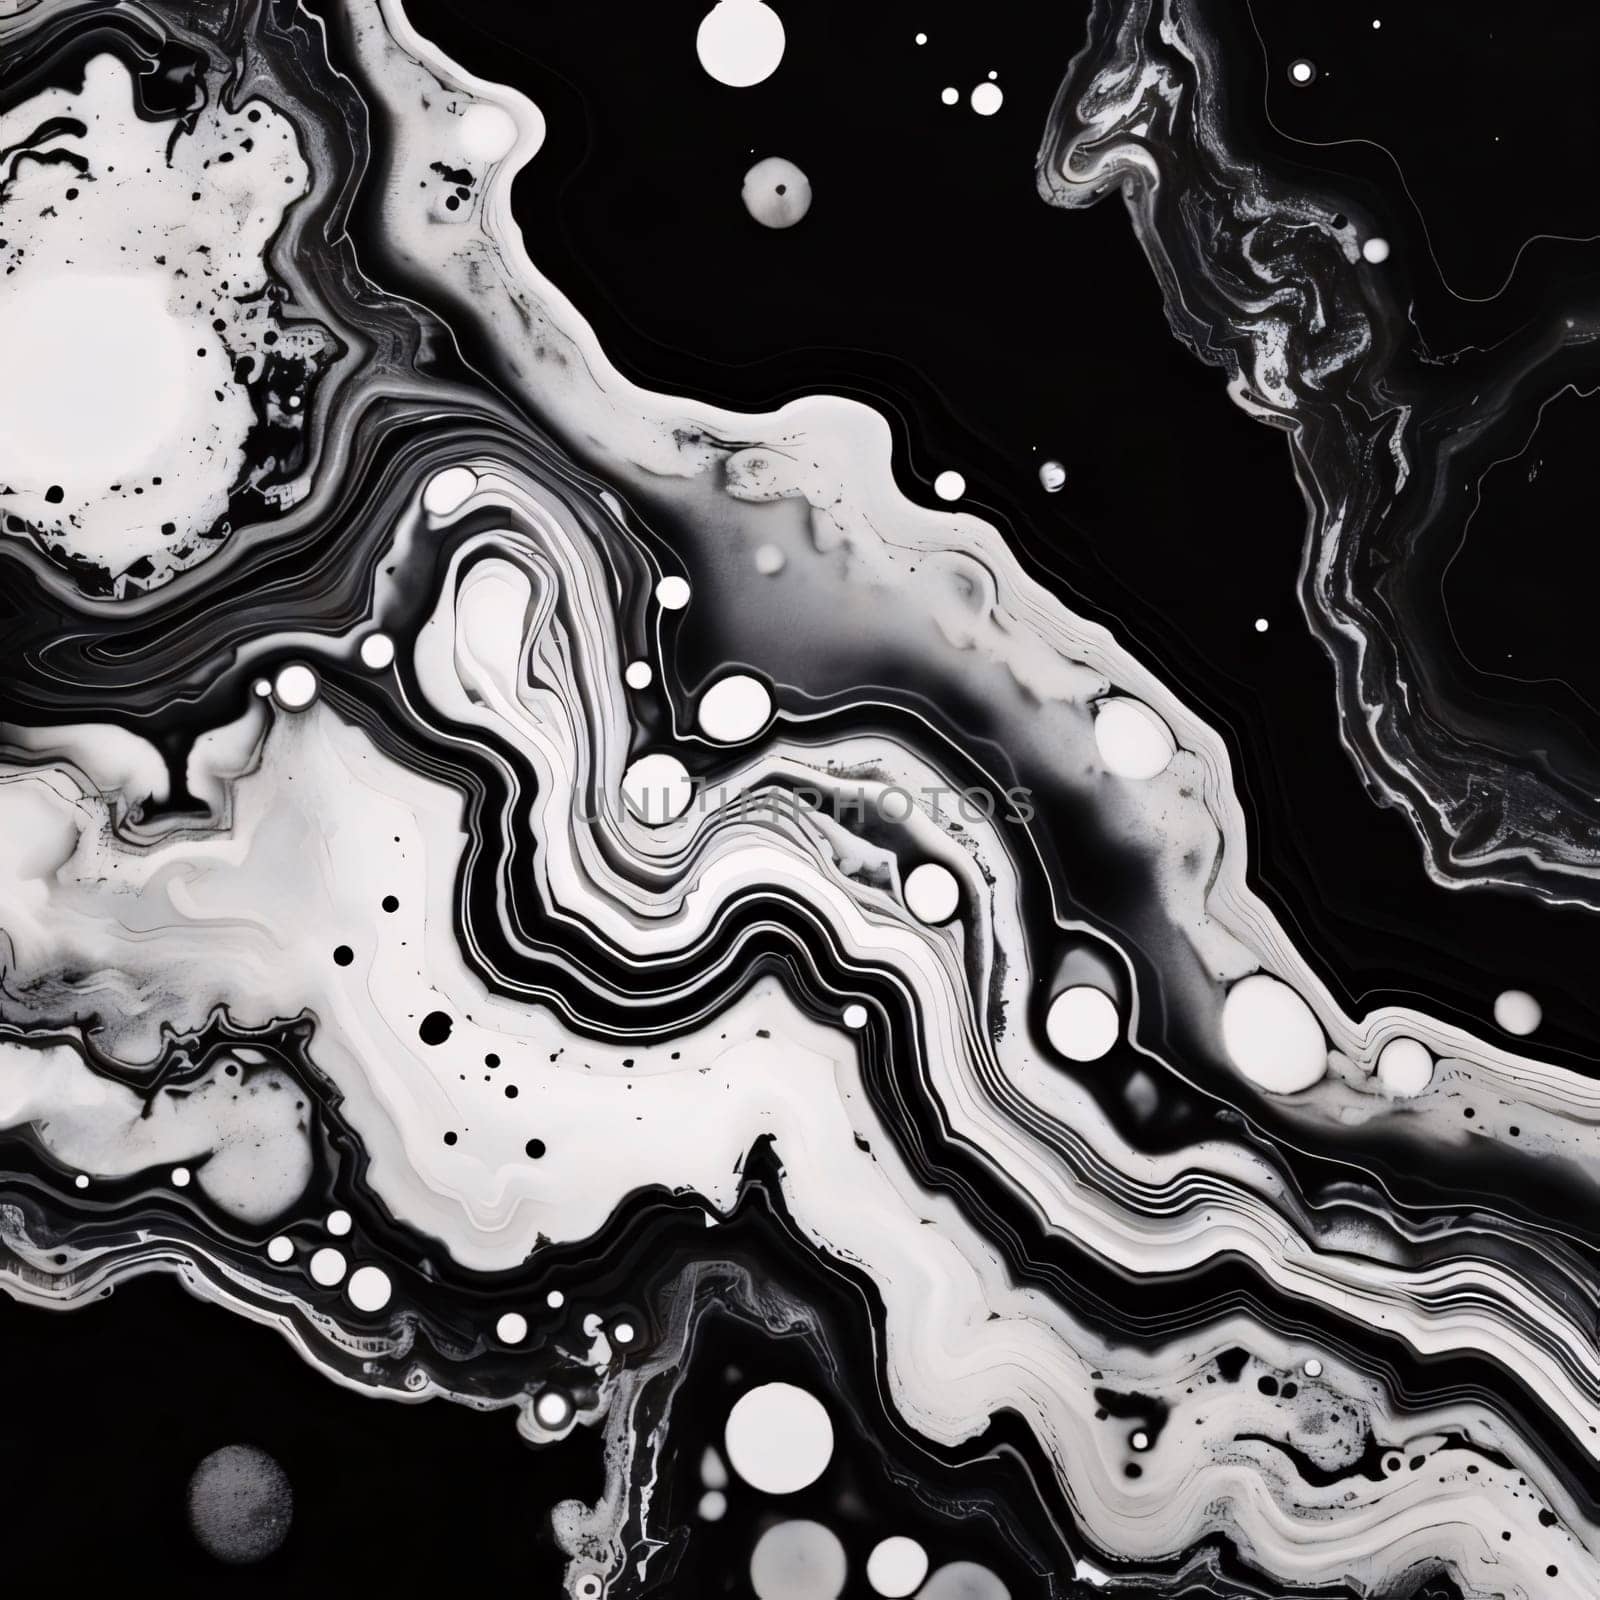 Abstract background design: Black and white marble pattern. Marbling texture design. Fluid art.